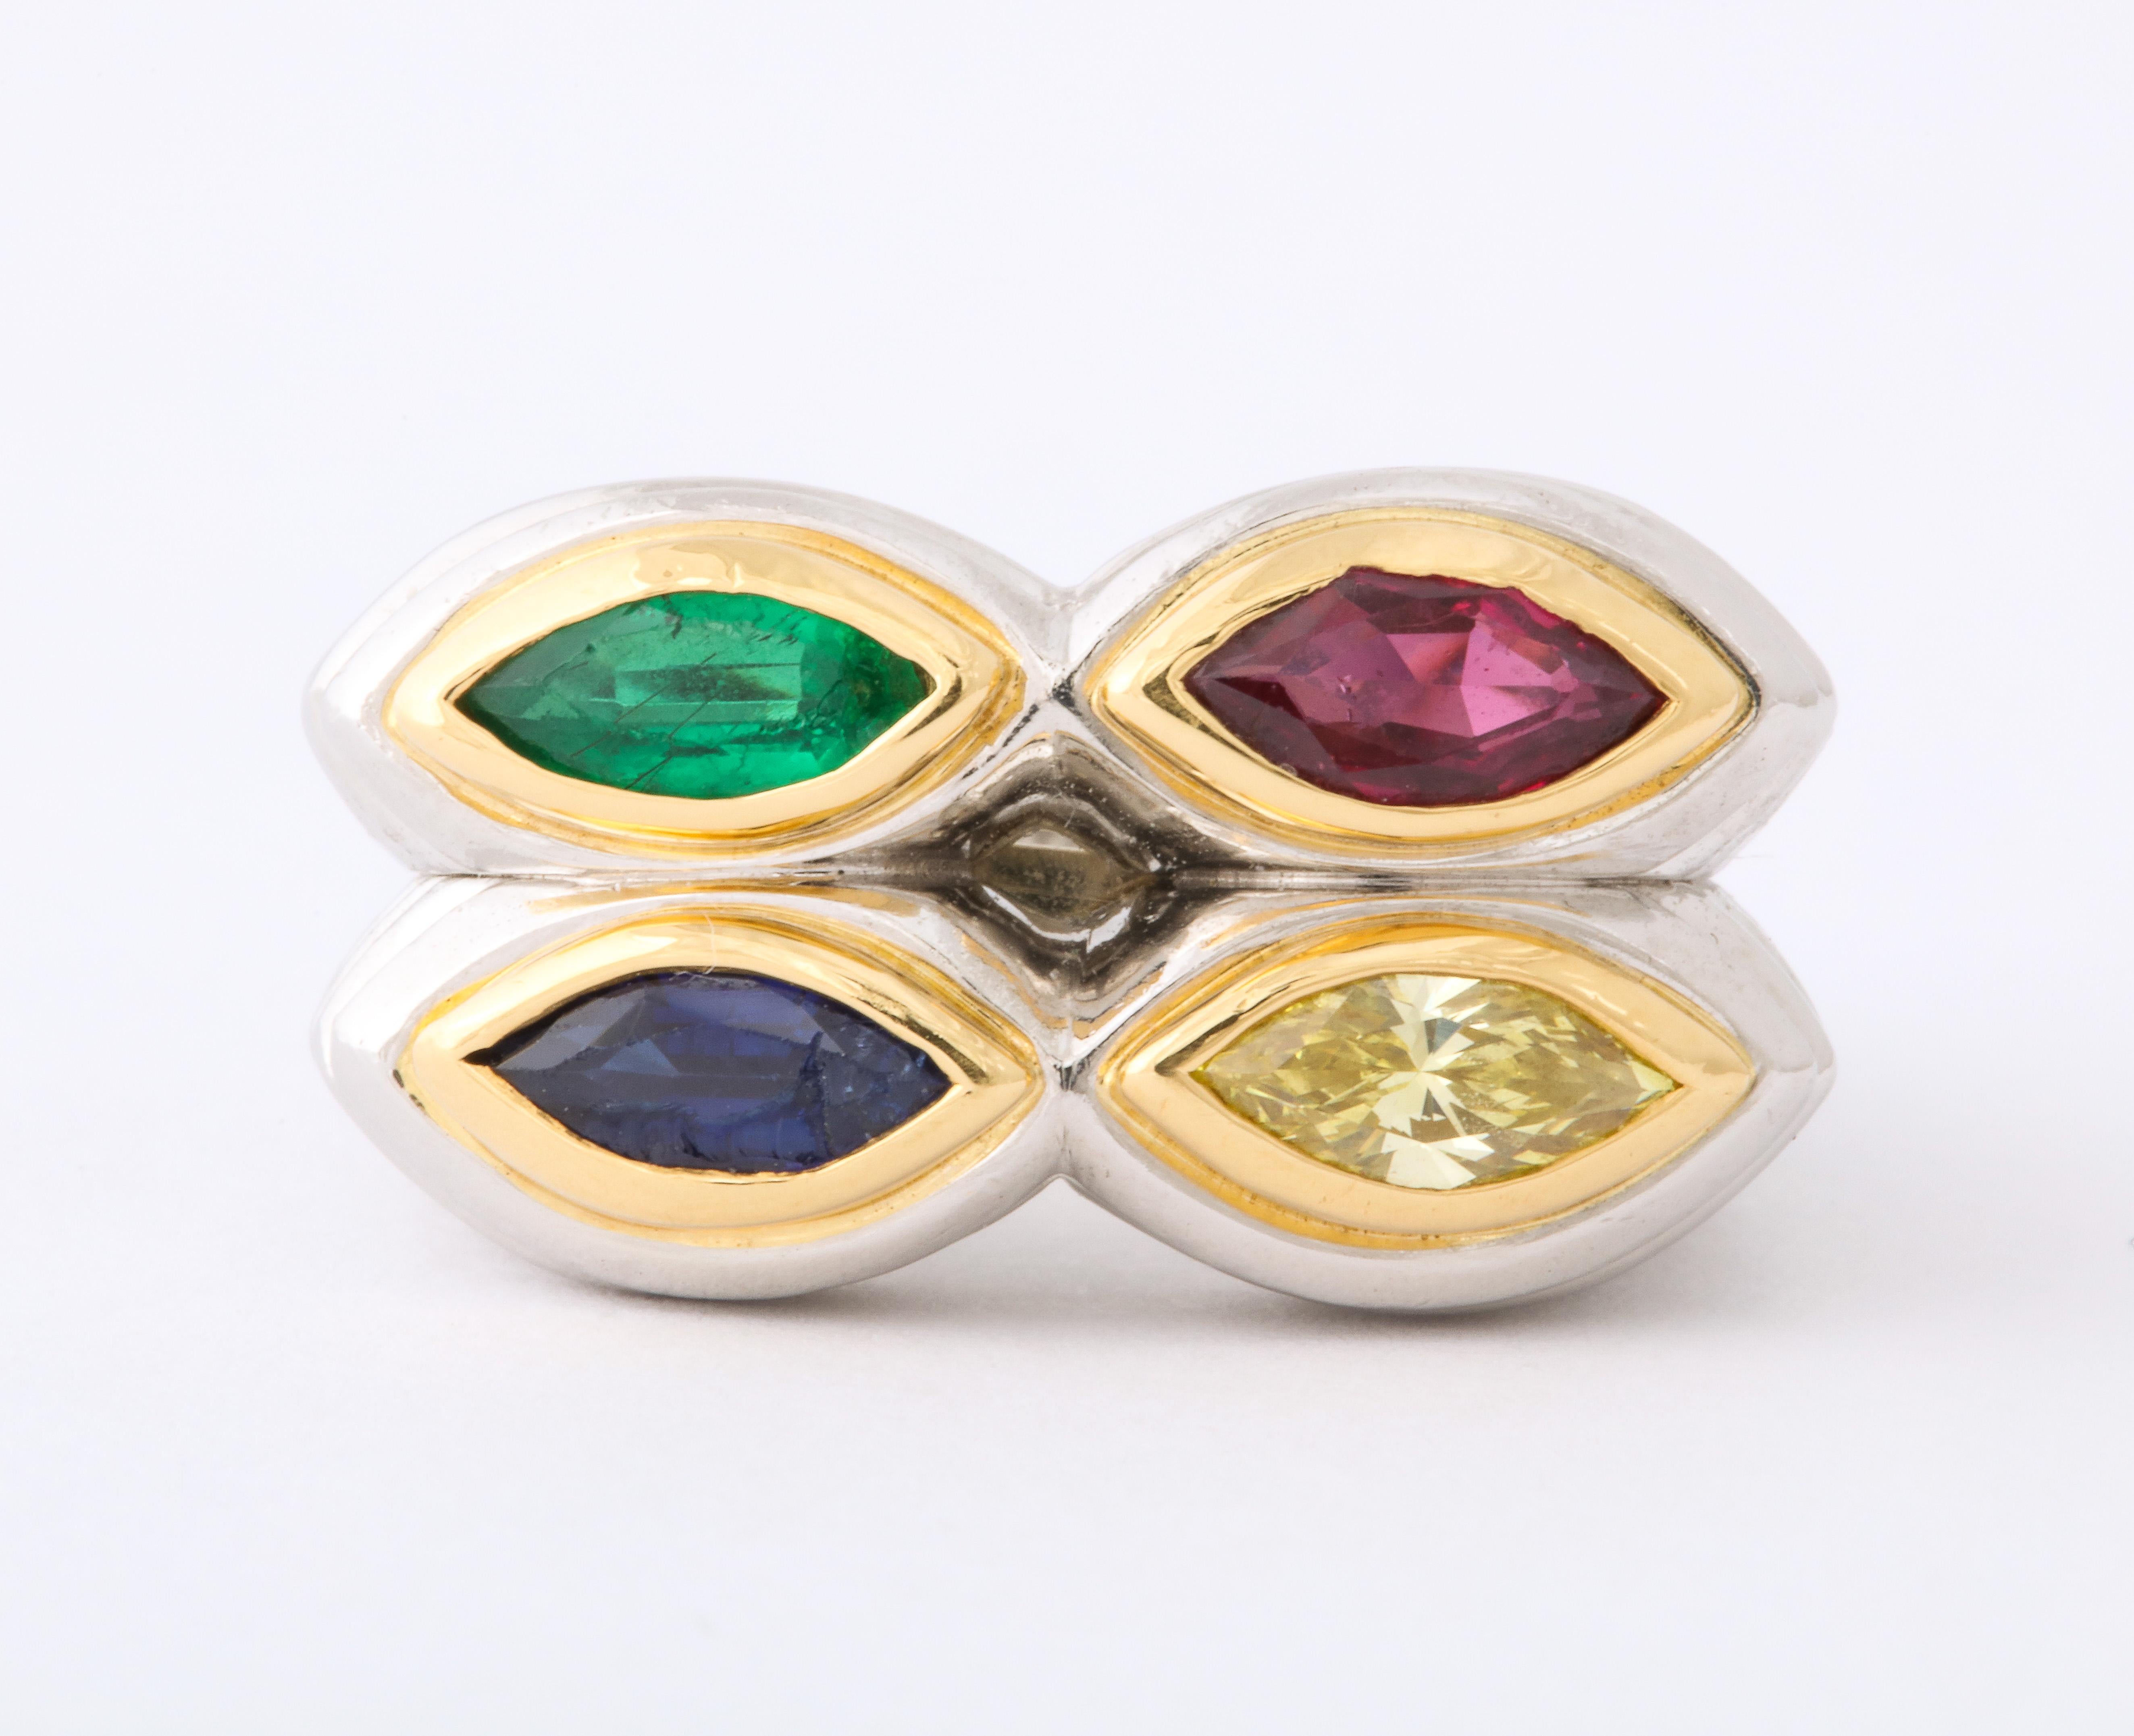 A Rare Bulgari Platinum, Gold, Mulit-Gem and Yellow Diamond Ring.

Fabulous ring by Bvlgari, circa 1970s.

With Sapphires, Ruby, Emerlad, and Yellow Diamond. 

Signed and marked (see photos). 100% authentic guaranteed. 

Total weight 24 grams. 



